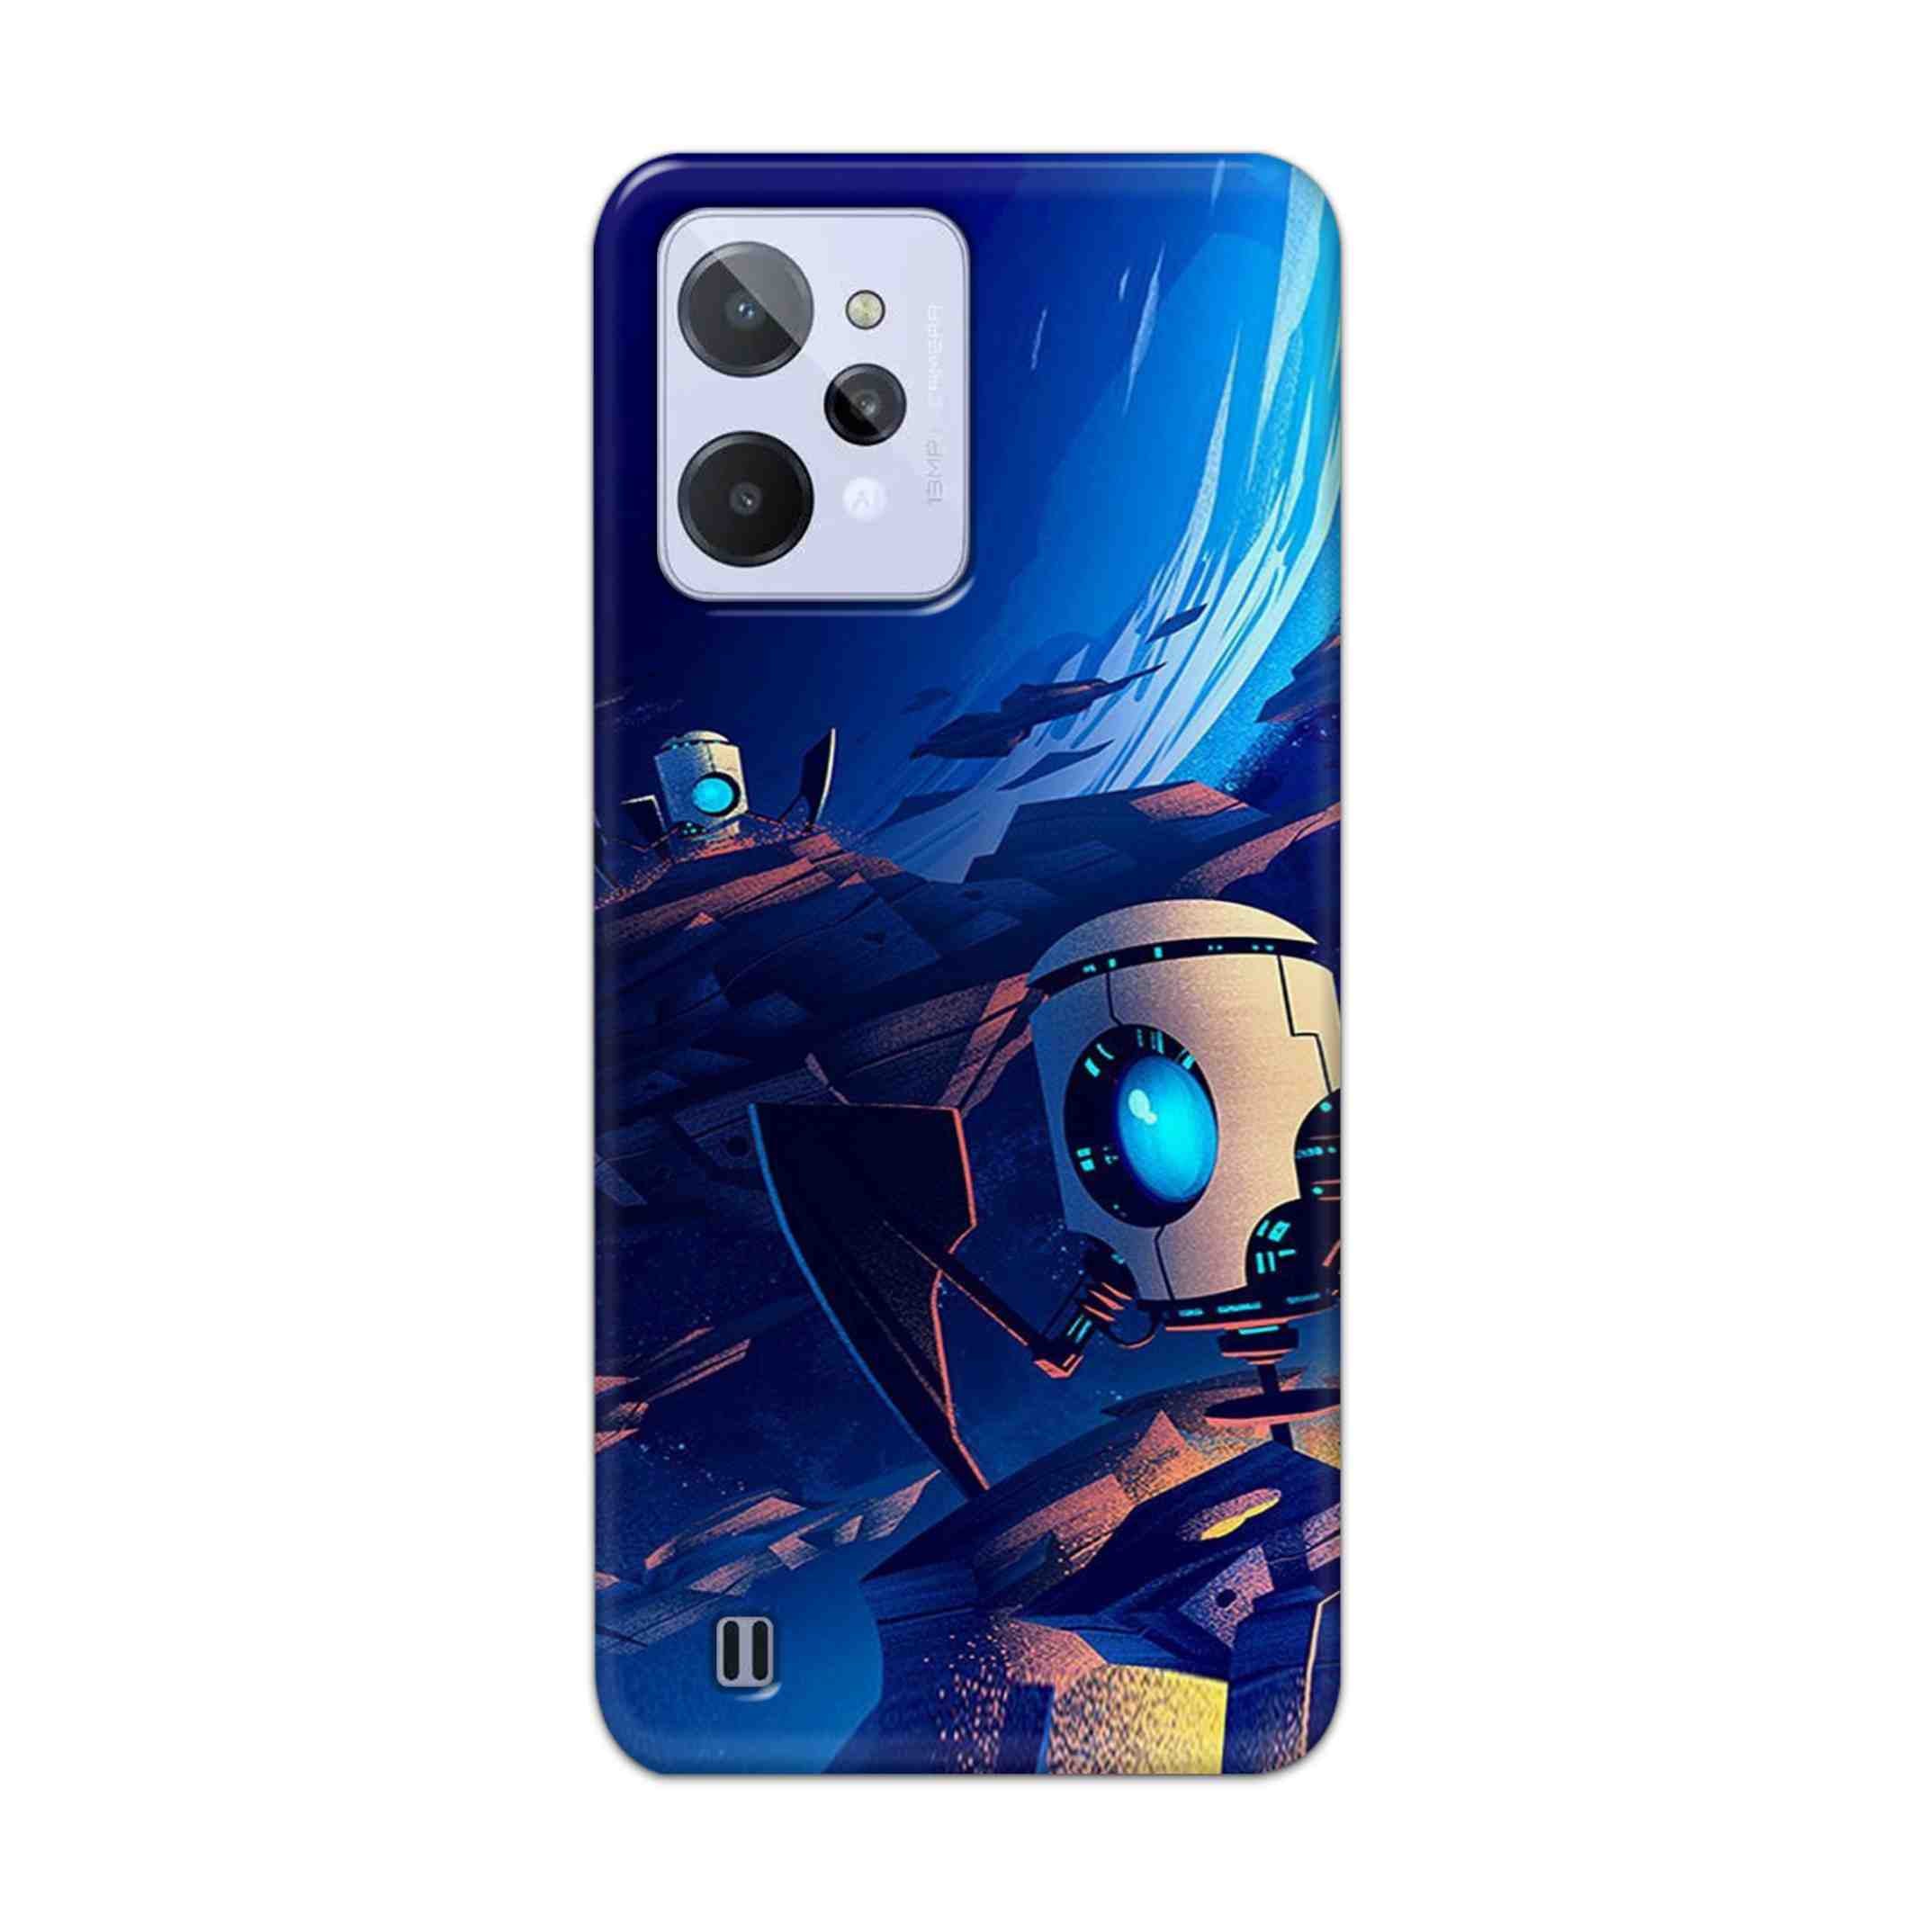 Buy Spaceship Robot Hard Back Mobile Phone Case Cover For Realme C31 Online